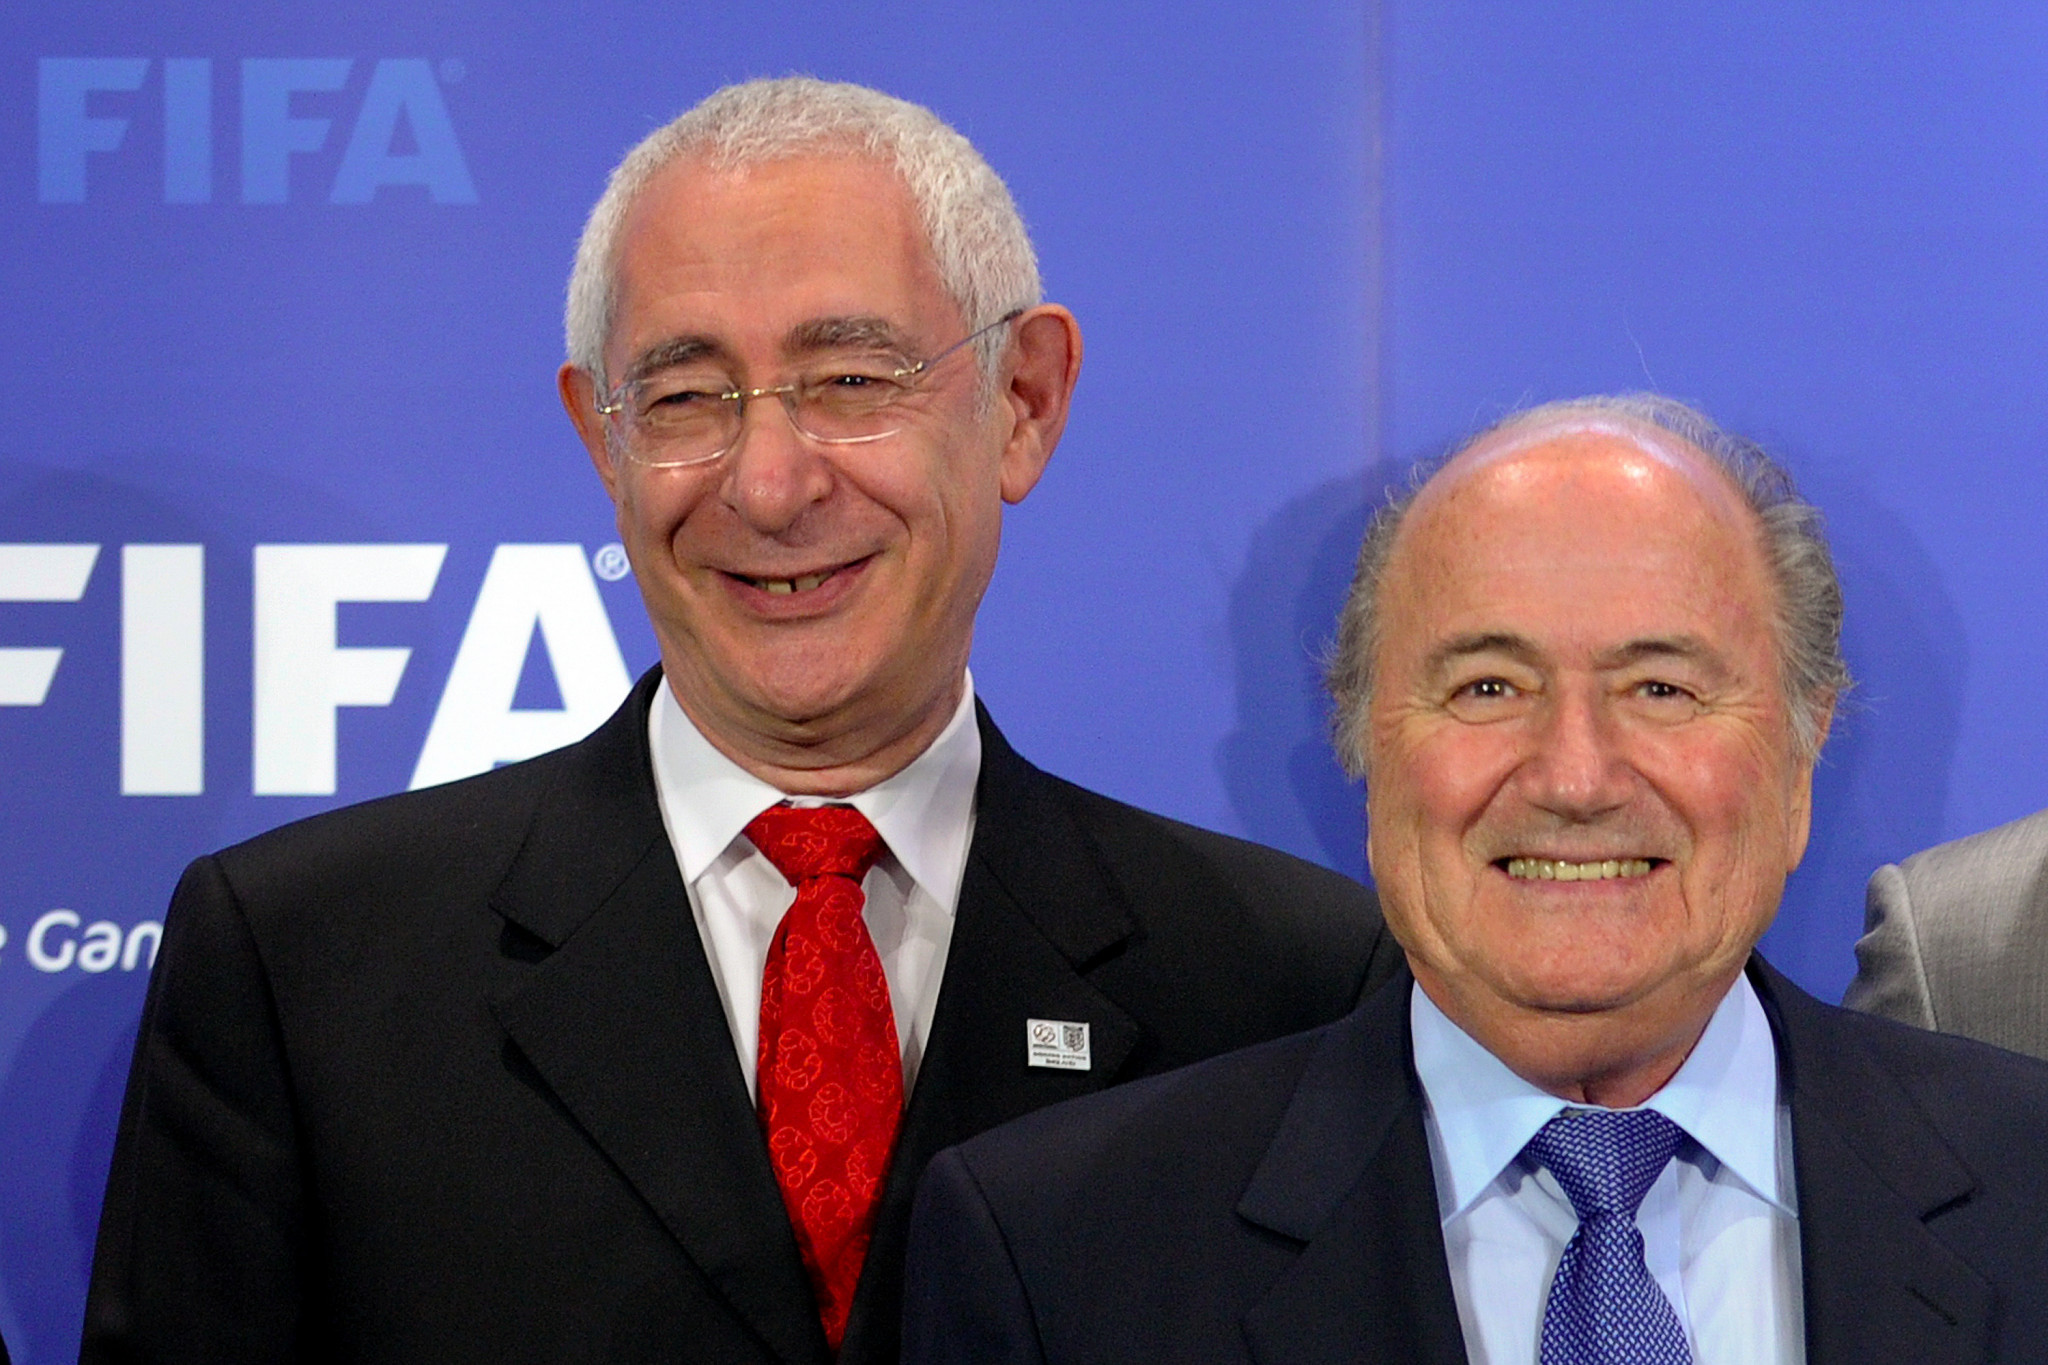 England's failed bid for 2018 FIFA World Cup was hacked, claims former FA chairman